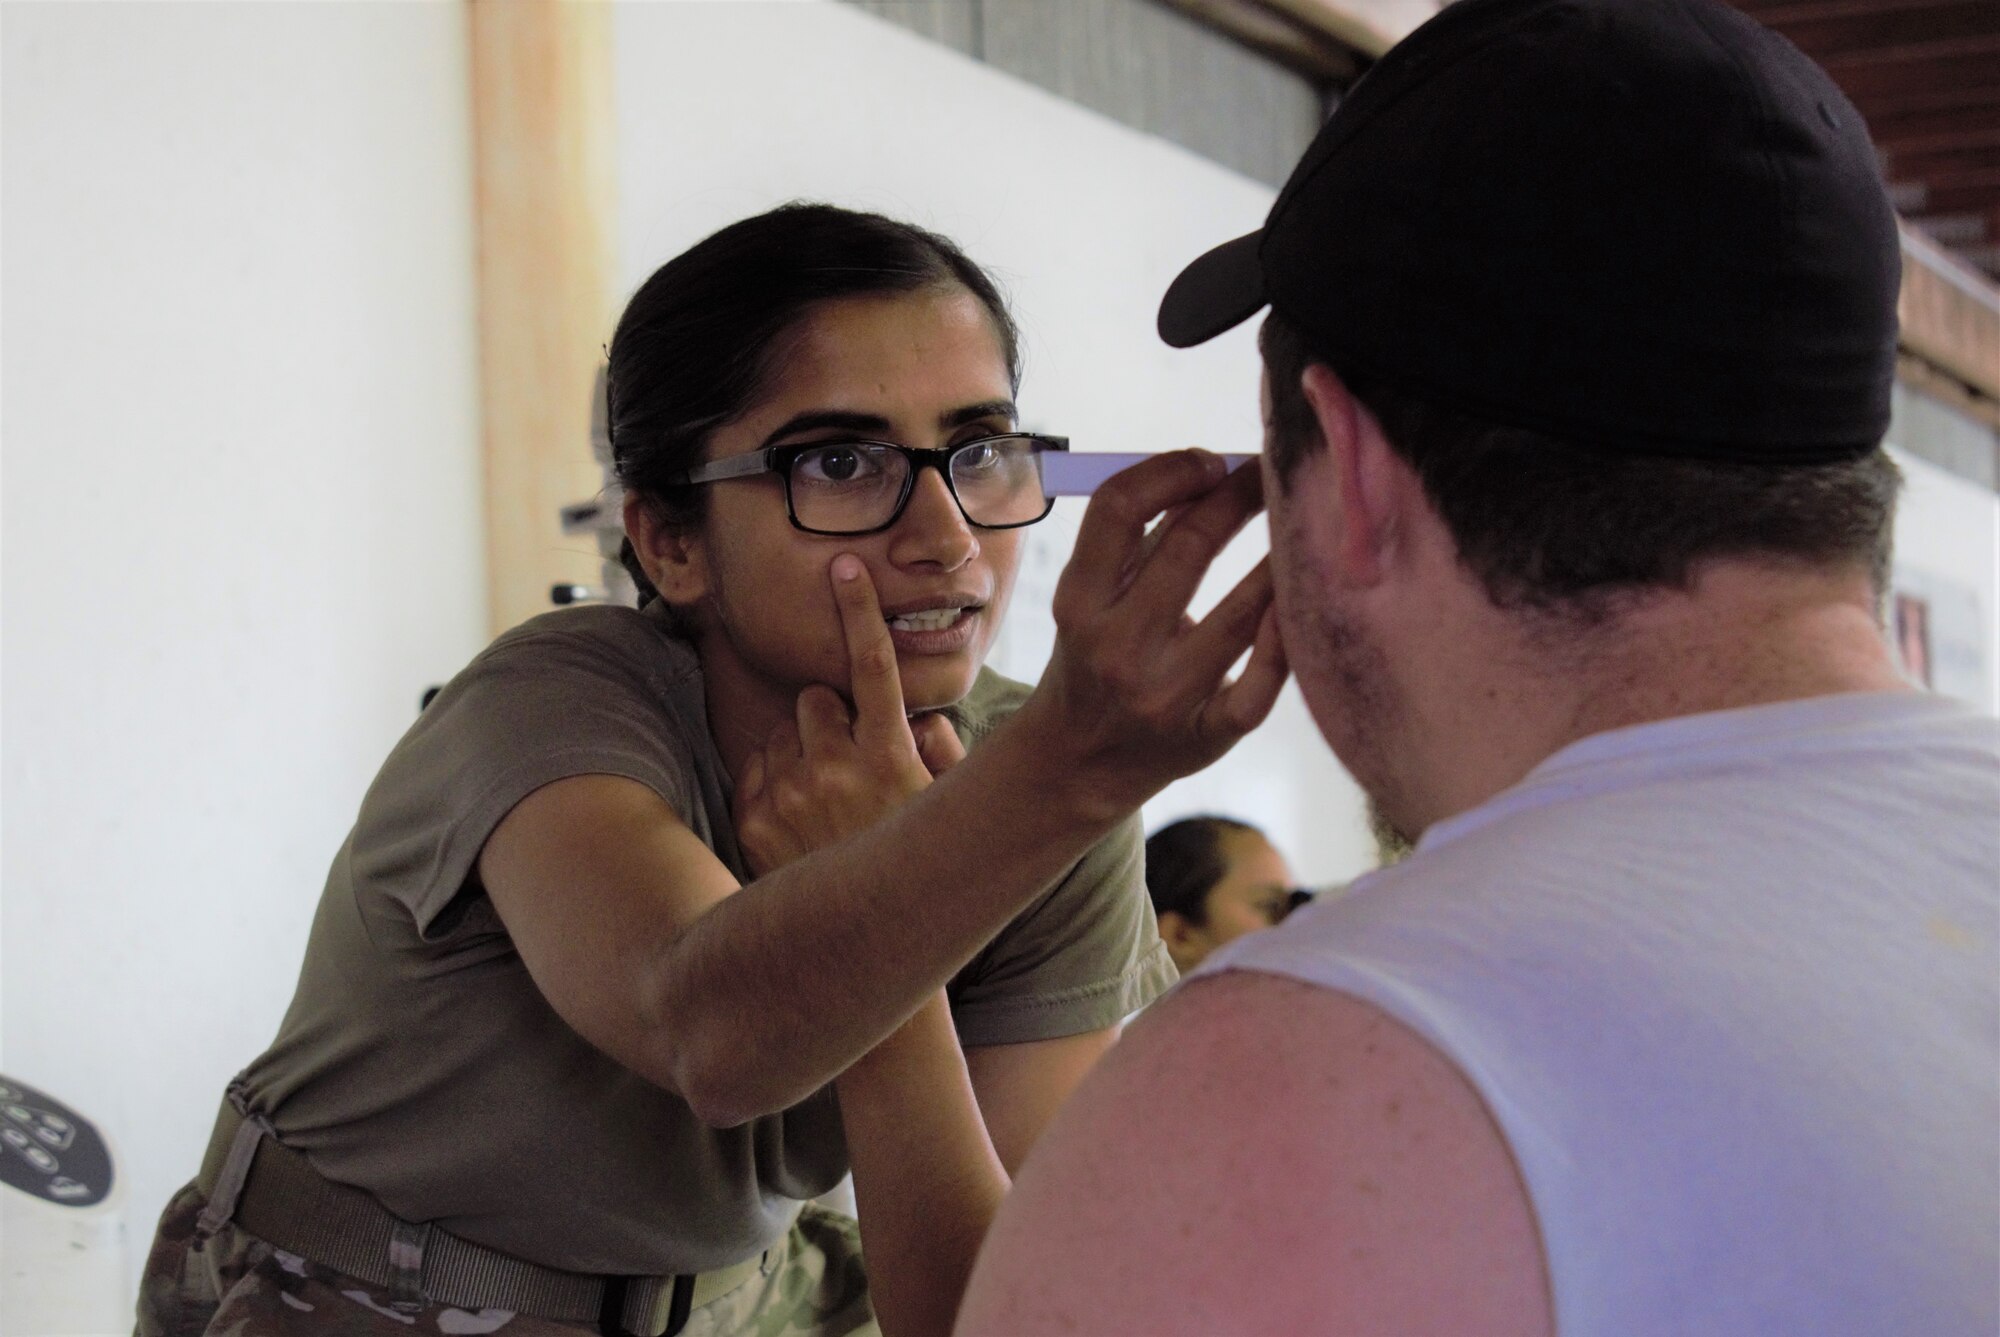 U.S. Army Capt. Sadia Kalsoom, optometrist, Expeditionary Medical Facility Dallas One, Ft. Worth, Texas, examines a patient at Innovative Readiness Training Appalachian Care 2019 at Wise County Fairgrounds, Wise, Va., Aug. 18, 2019. Appalachian Care Innovative Readiness Training 2019 takes place Aug. 16-29, 2019, to care for the medically underserved communities of Wise, Virginia while simultaneously conducting deployment and readiness training for military personnel. Innovative Readiness Training is the only hands-on training opportunity authorized to operate within the U.S. During Appalachian Care IRT 2019, medical operations will be staged at one physical location at Wise County Fairgrounds. The Appalachian Care IRT 2019 team provides medical, dental, optometry and veterinary care to assist local health and municipal authorities in addressing underserved and unmet community health and civic needs. Units also conduct critical mission training and logistical movement in order to simulate hands-on deployment readiness operations and health care delivery in the time of crisis, conflict or disaster. (Air National Guard photo by 1st Lt. Andrew Layton)